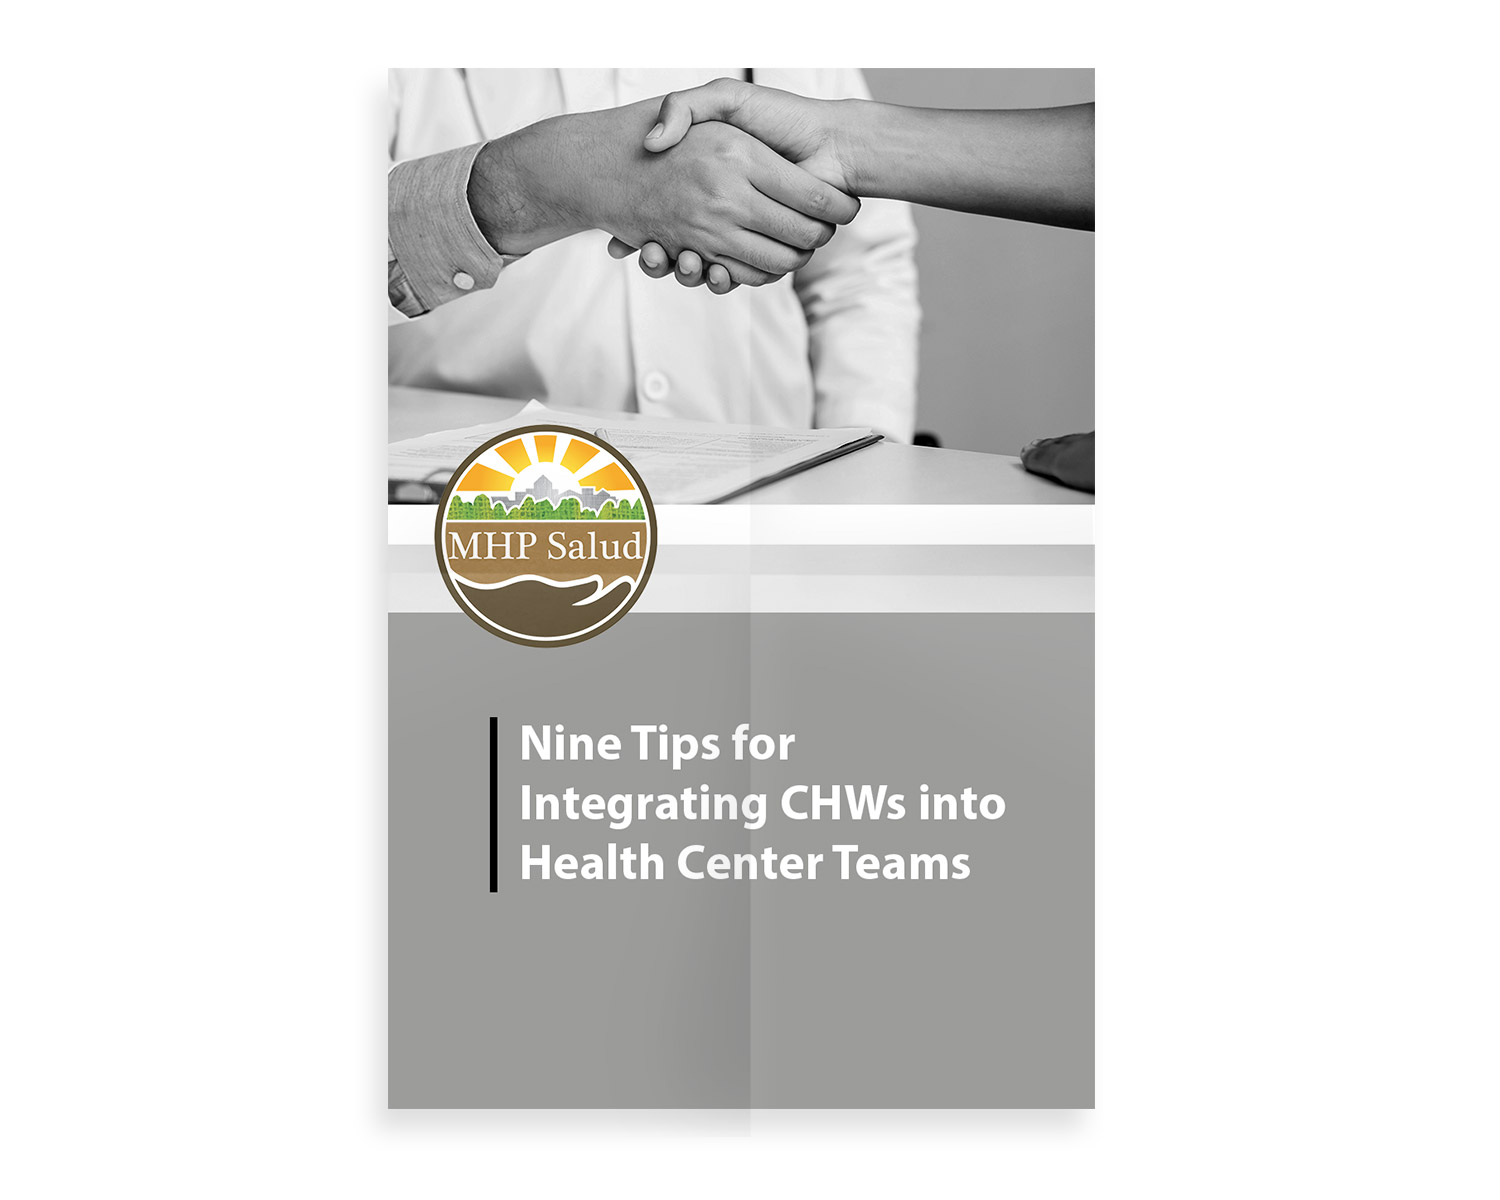 Nine Tips for Integrating CHWs into Health Center Teams